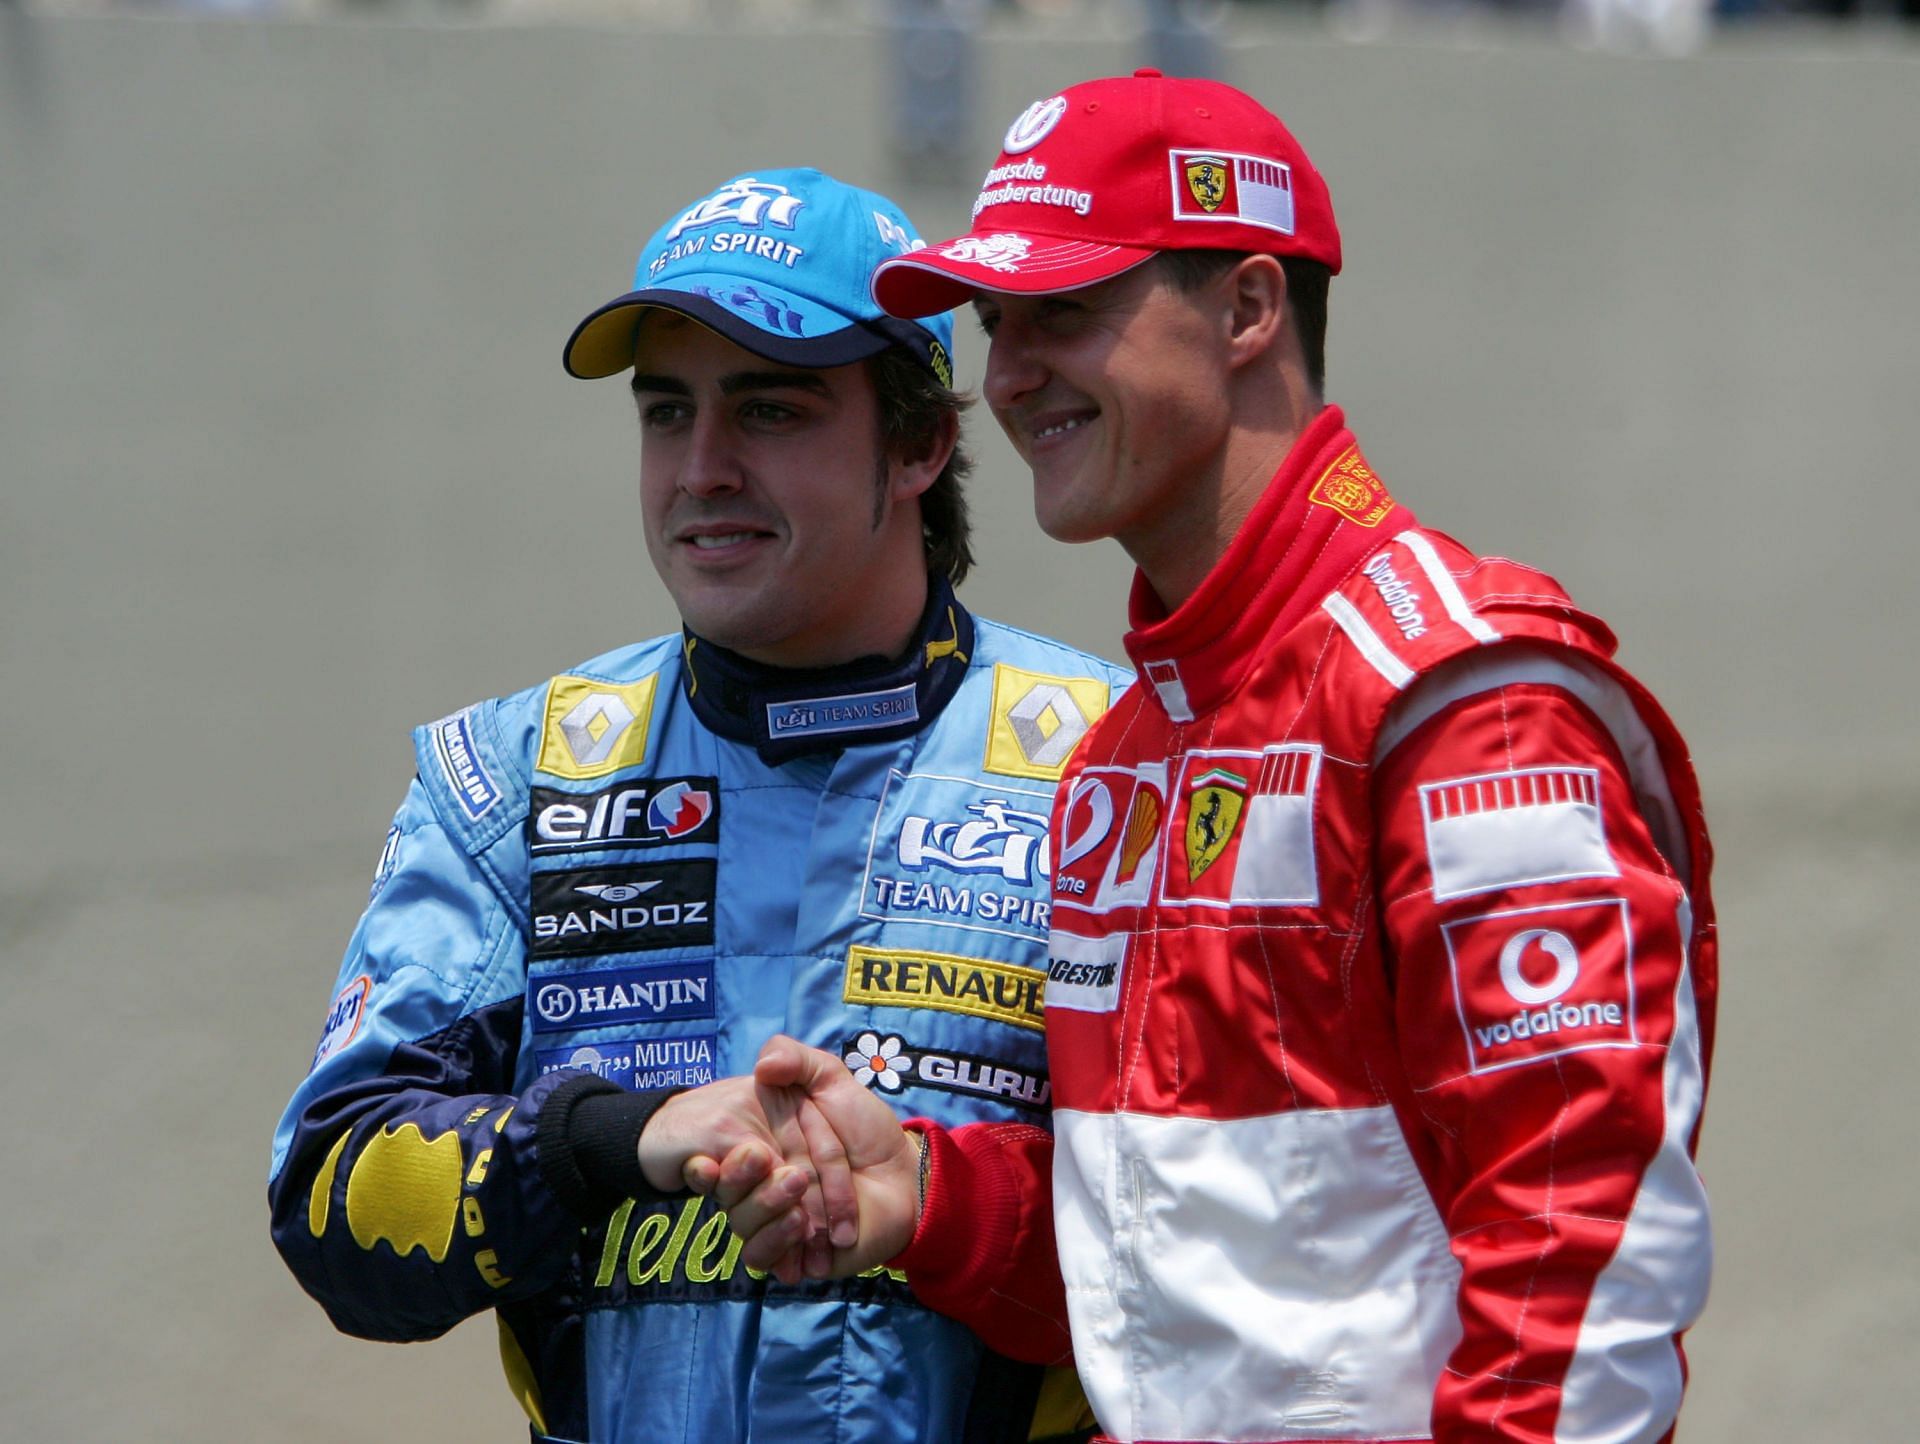 Fernando Alonso and Michael Schumacher were involved in a year-long tussle in 2006